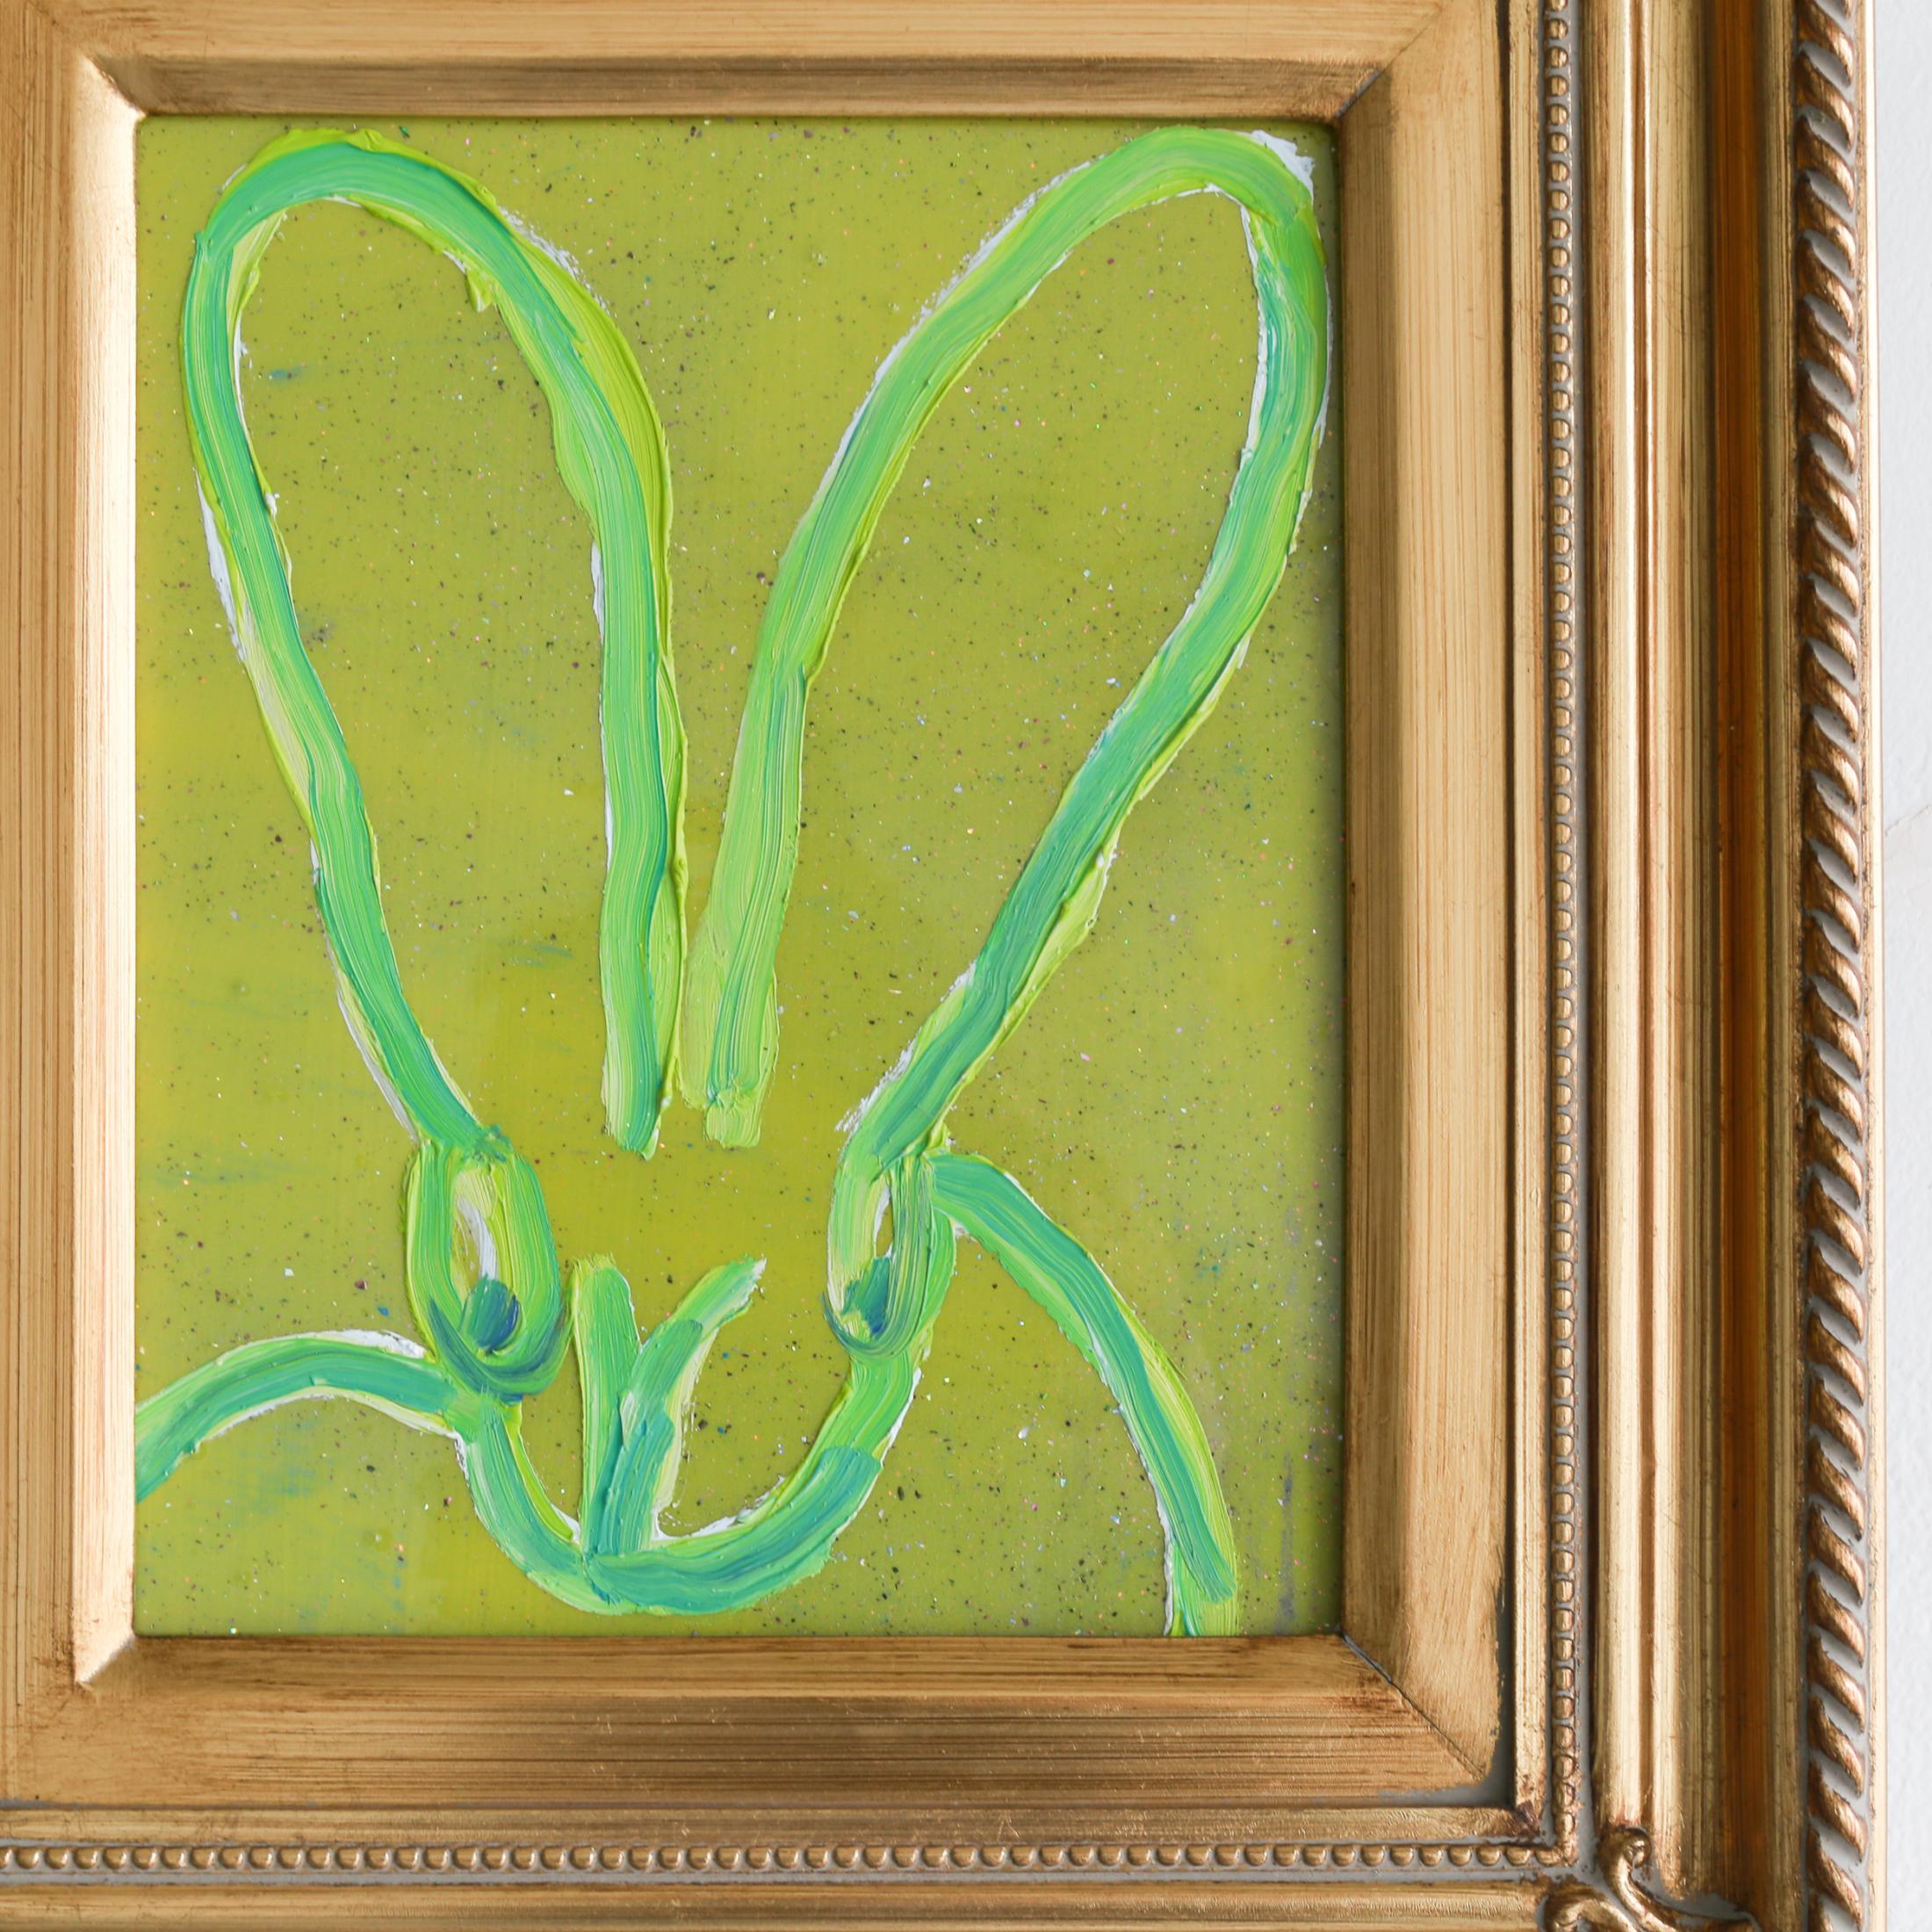 Green Resin - Neo-Expressionist Painting by Hunt Slonem